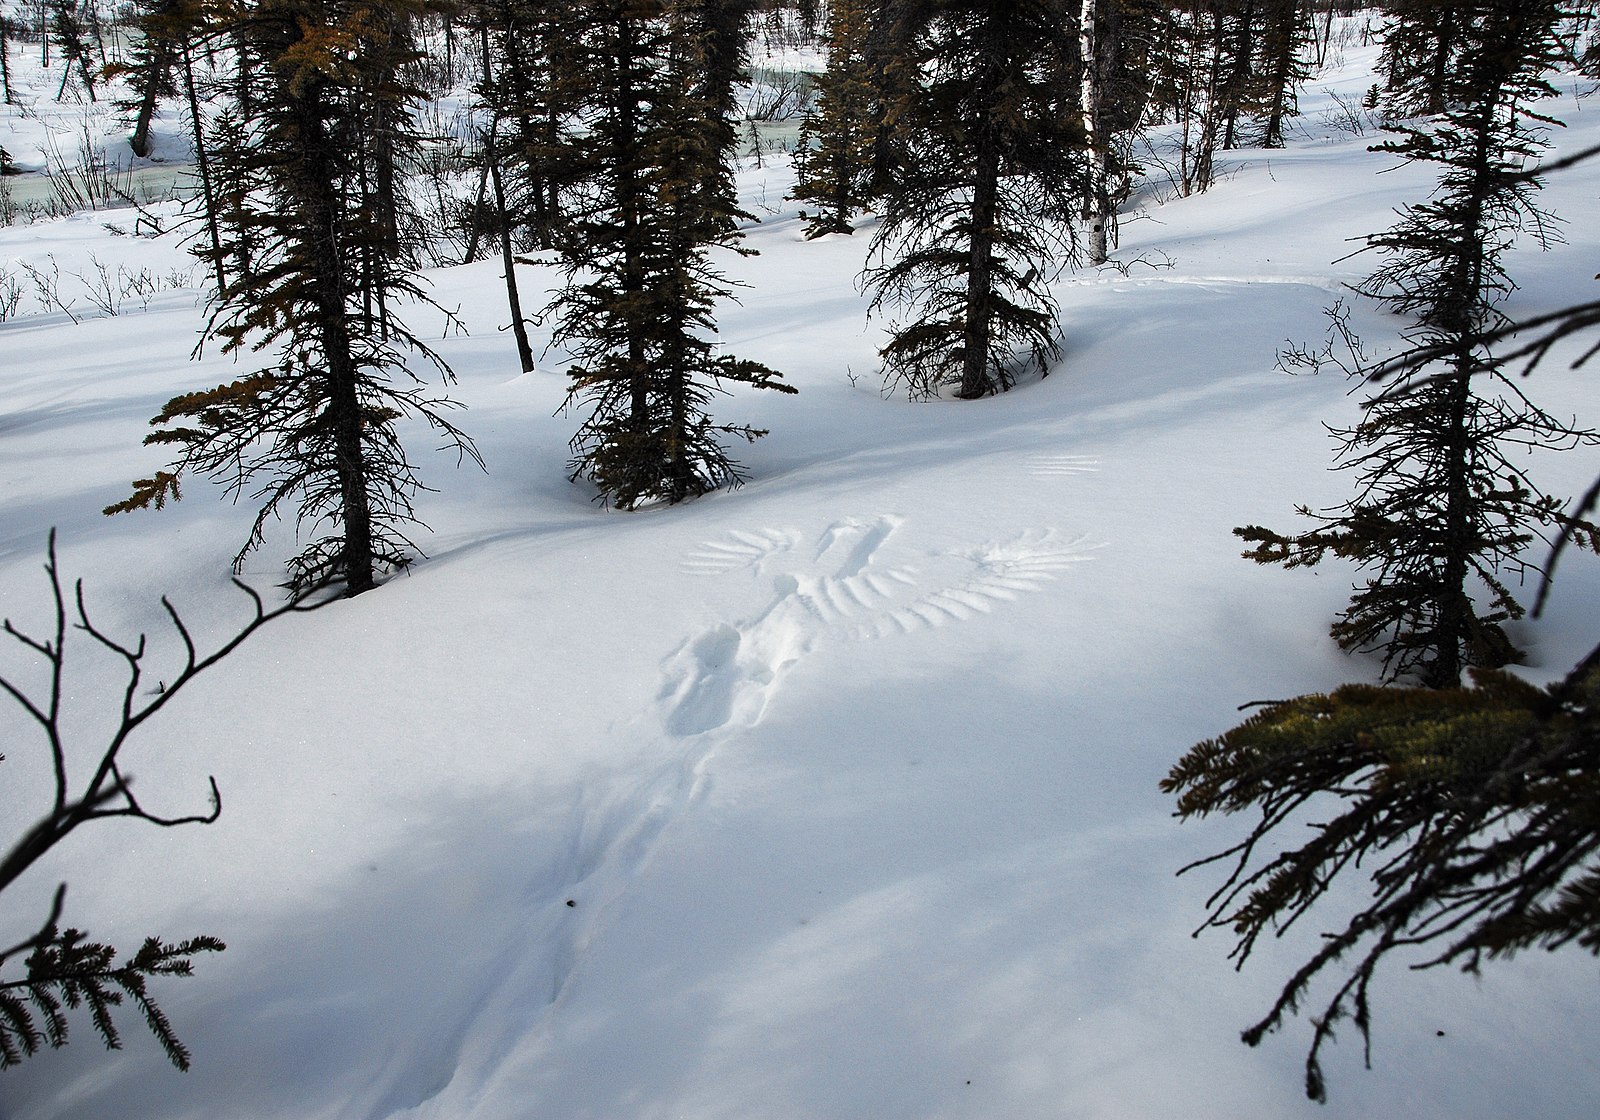 An imprint in the snow from a great grey owl hunting prey in the subnivean zone.